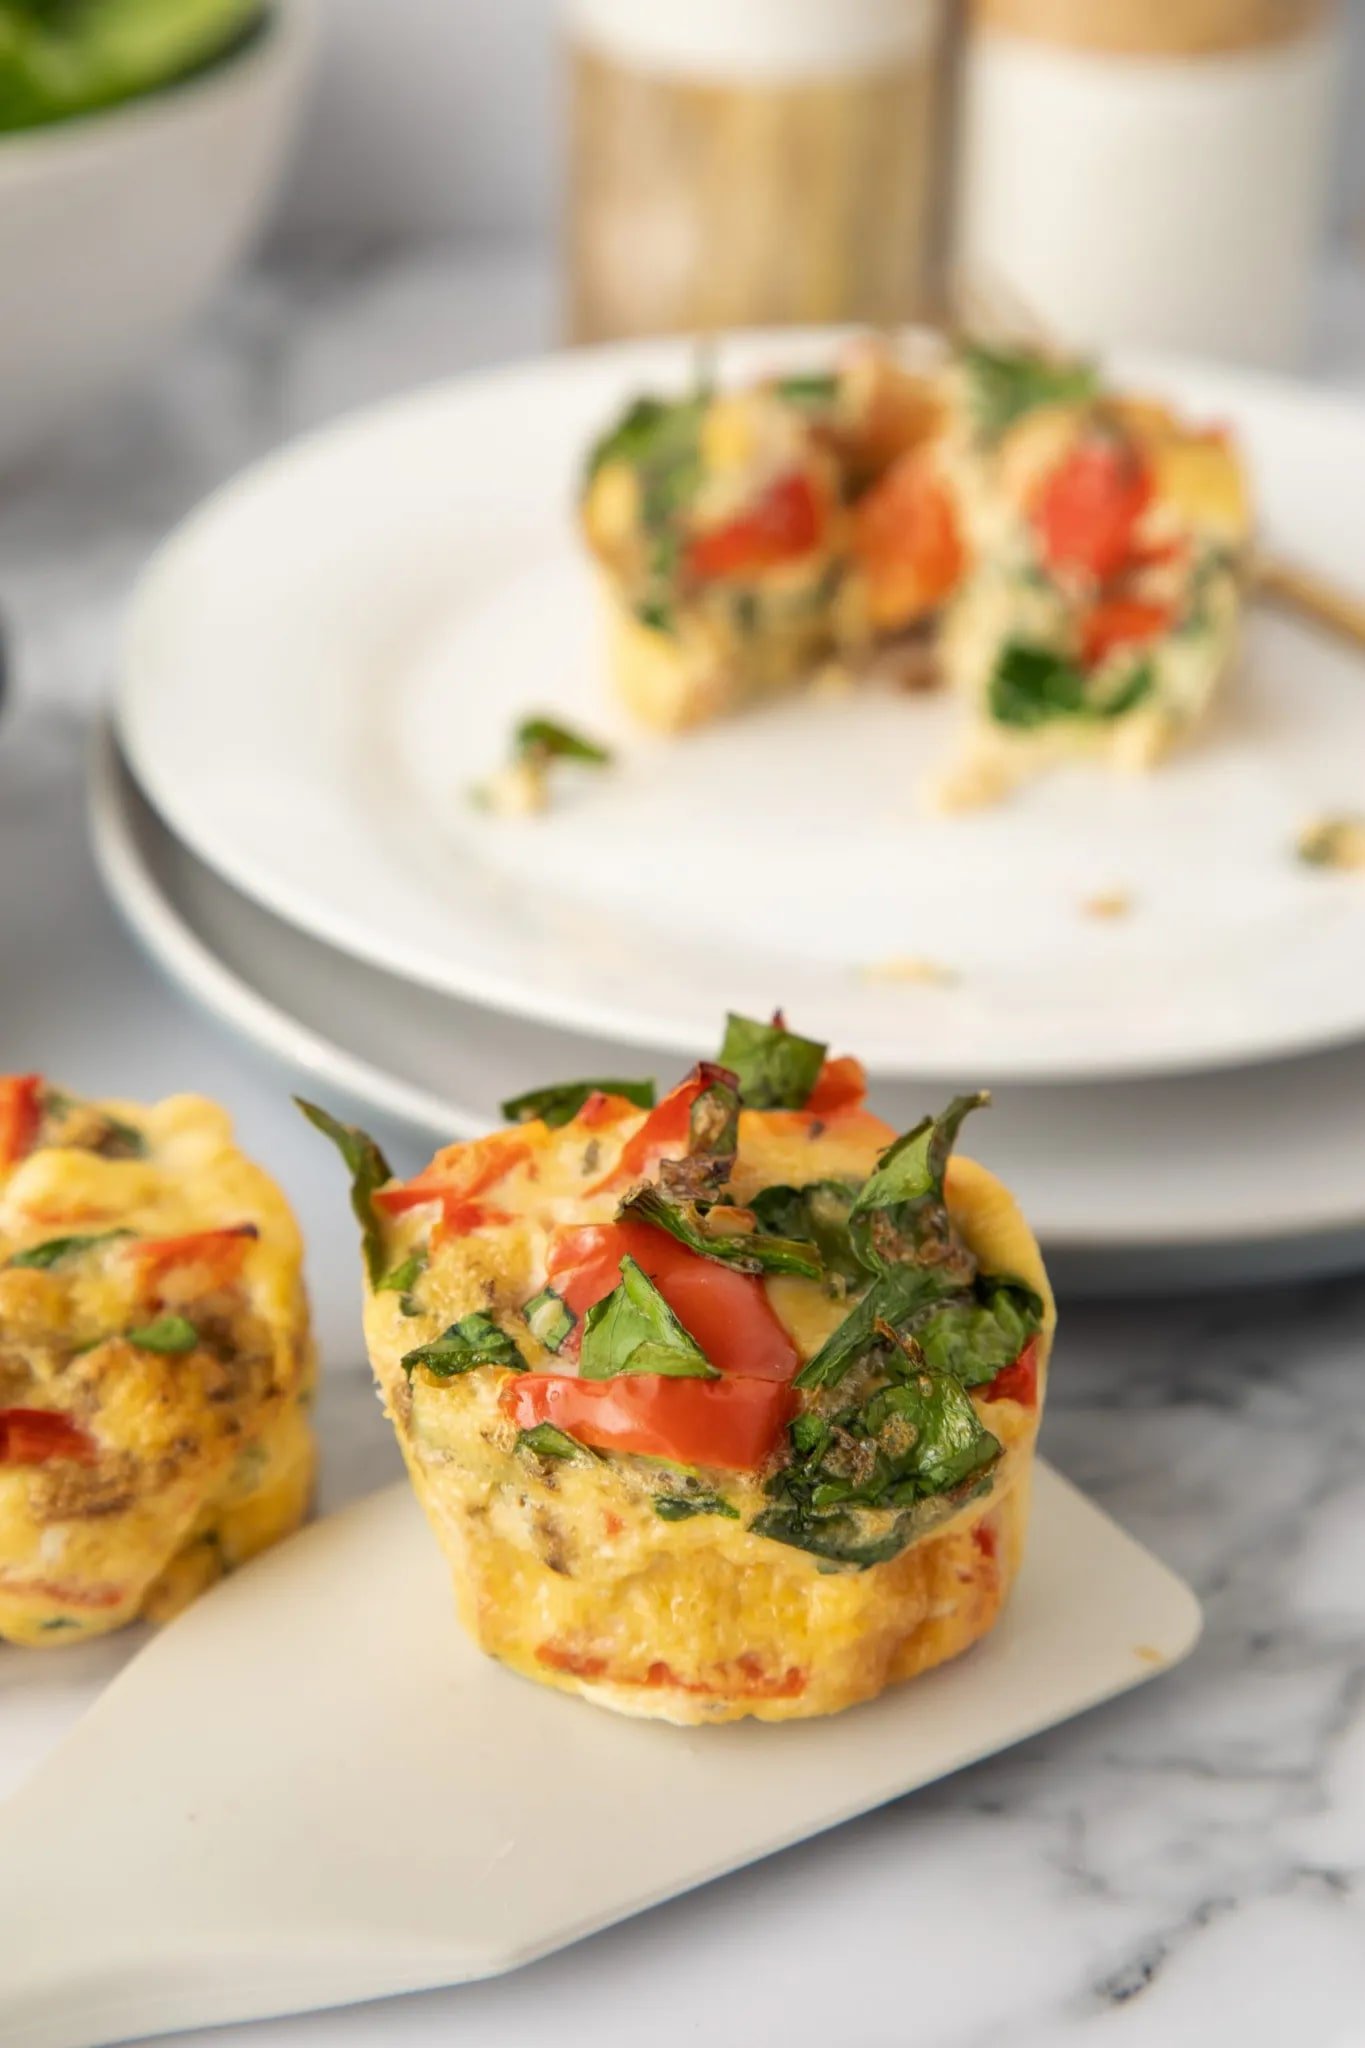 Healthy Egg Muffin Cups (Meal Prep Idea!) - A Sassy Spoon